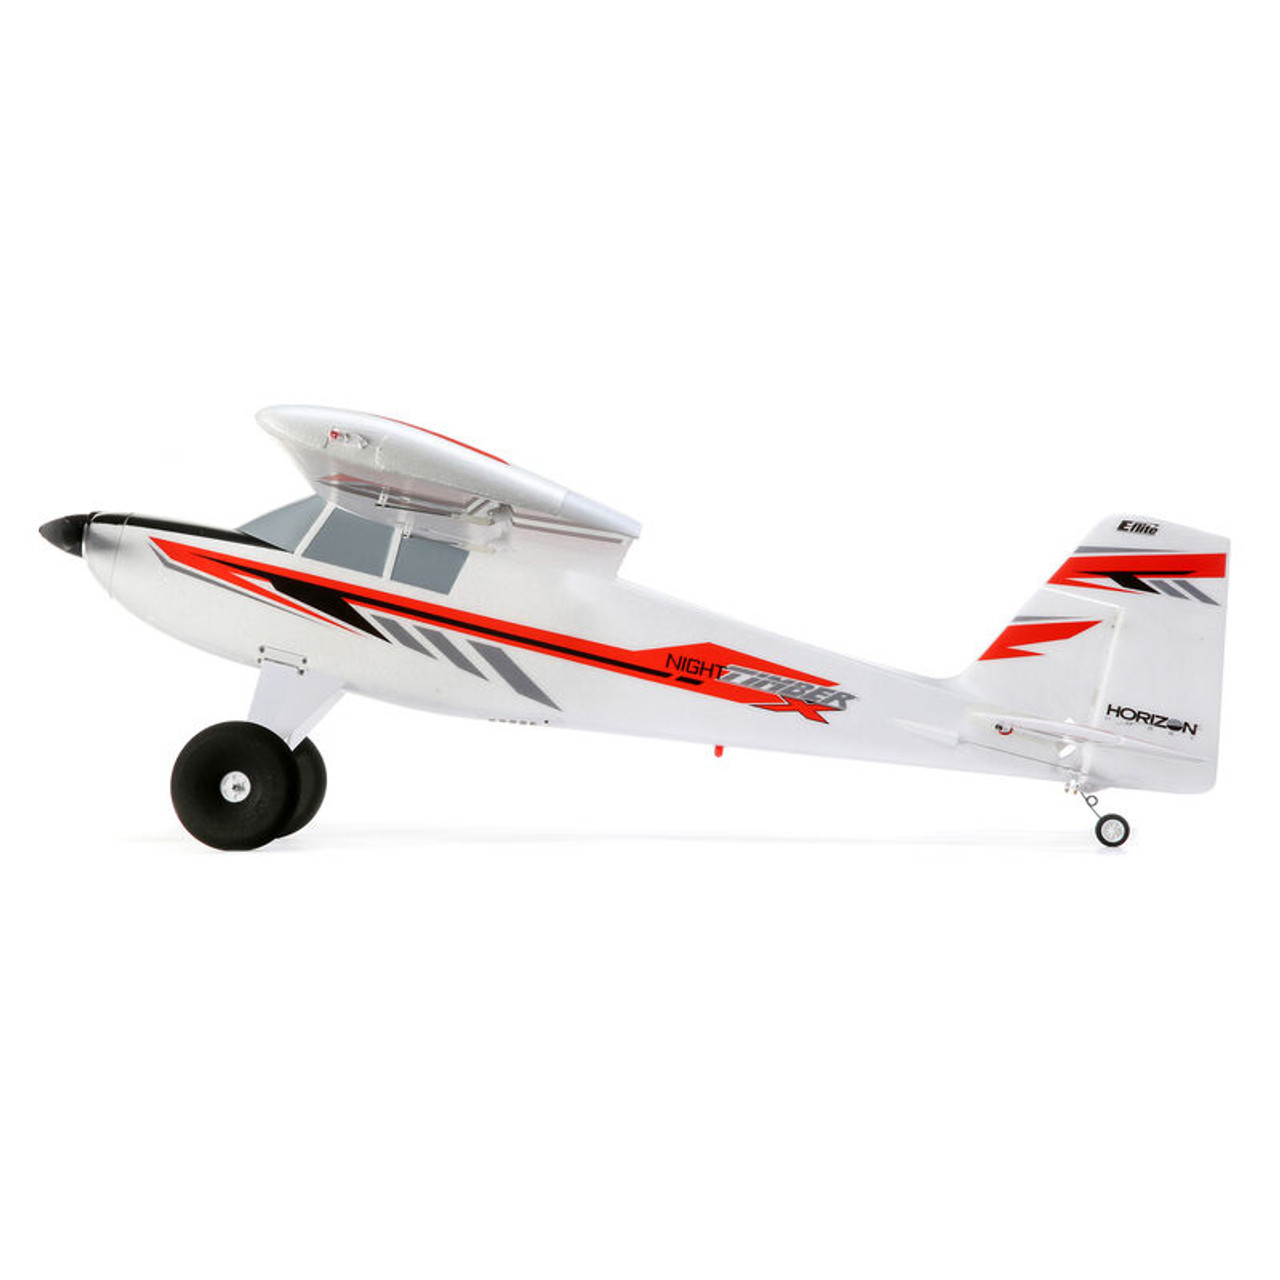 E-flite Night Timber X 1.2M BNF Basic Electric Airplane (1200mm) w/AS3X & SAFE Select